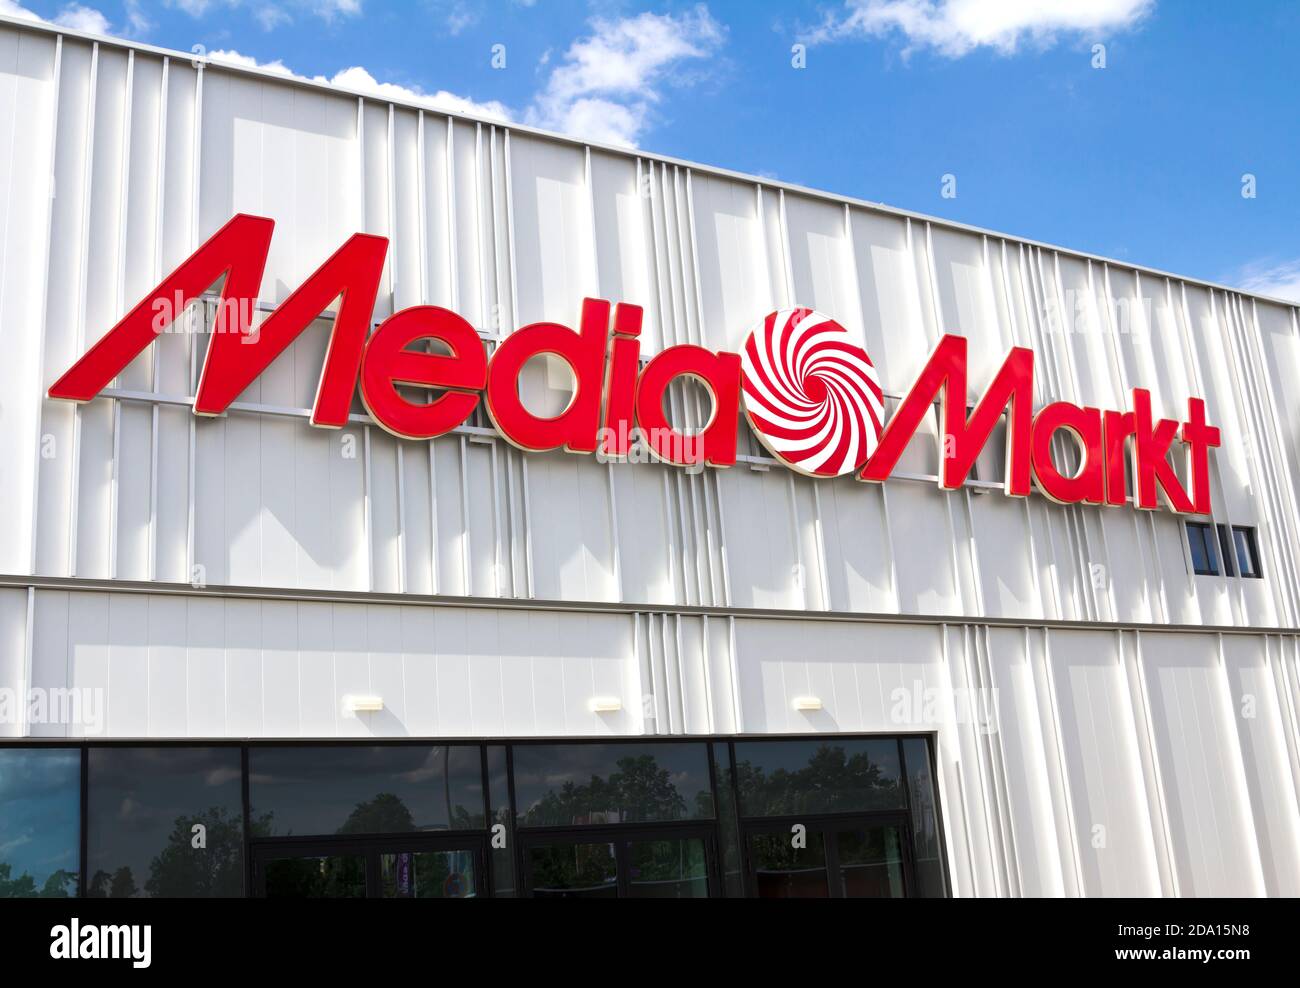 Entry of a Media Markt store. Mediamarkt is a German chain of stores selling consumer electronics with numerous branches throughout Europe and Asia. Stock Photo